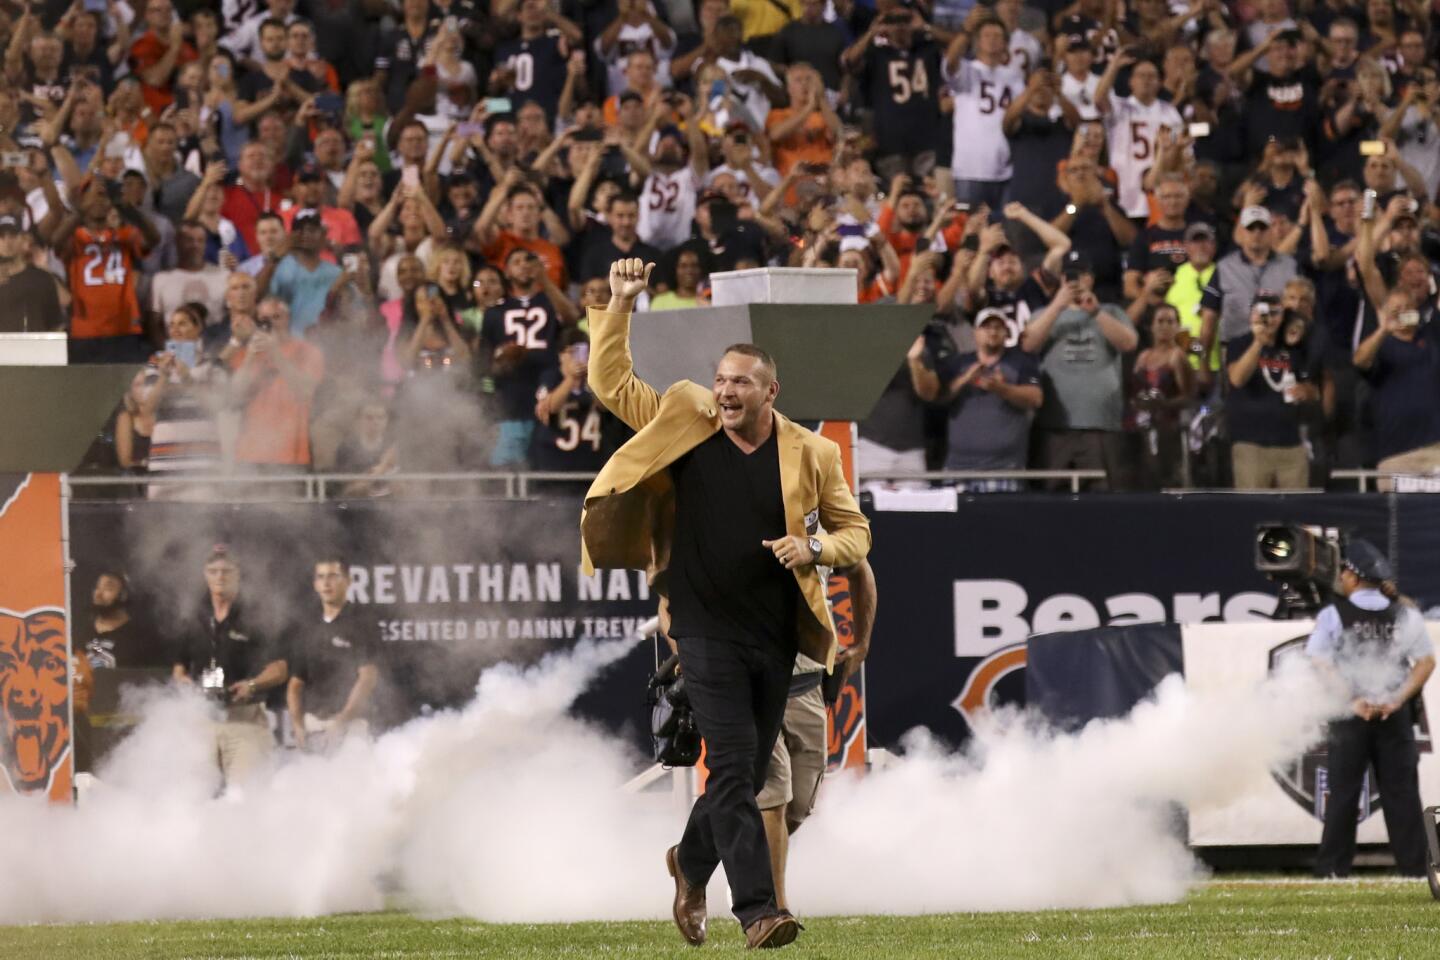 Brian Urlacher runs on the field before being awarded the Hall of Fame Ring of Excellence during halftime of the Bears-Seahawks game at Soldier Field on Sept. 17, 2018.